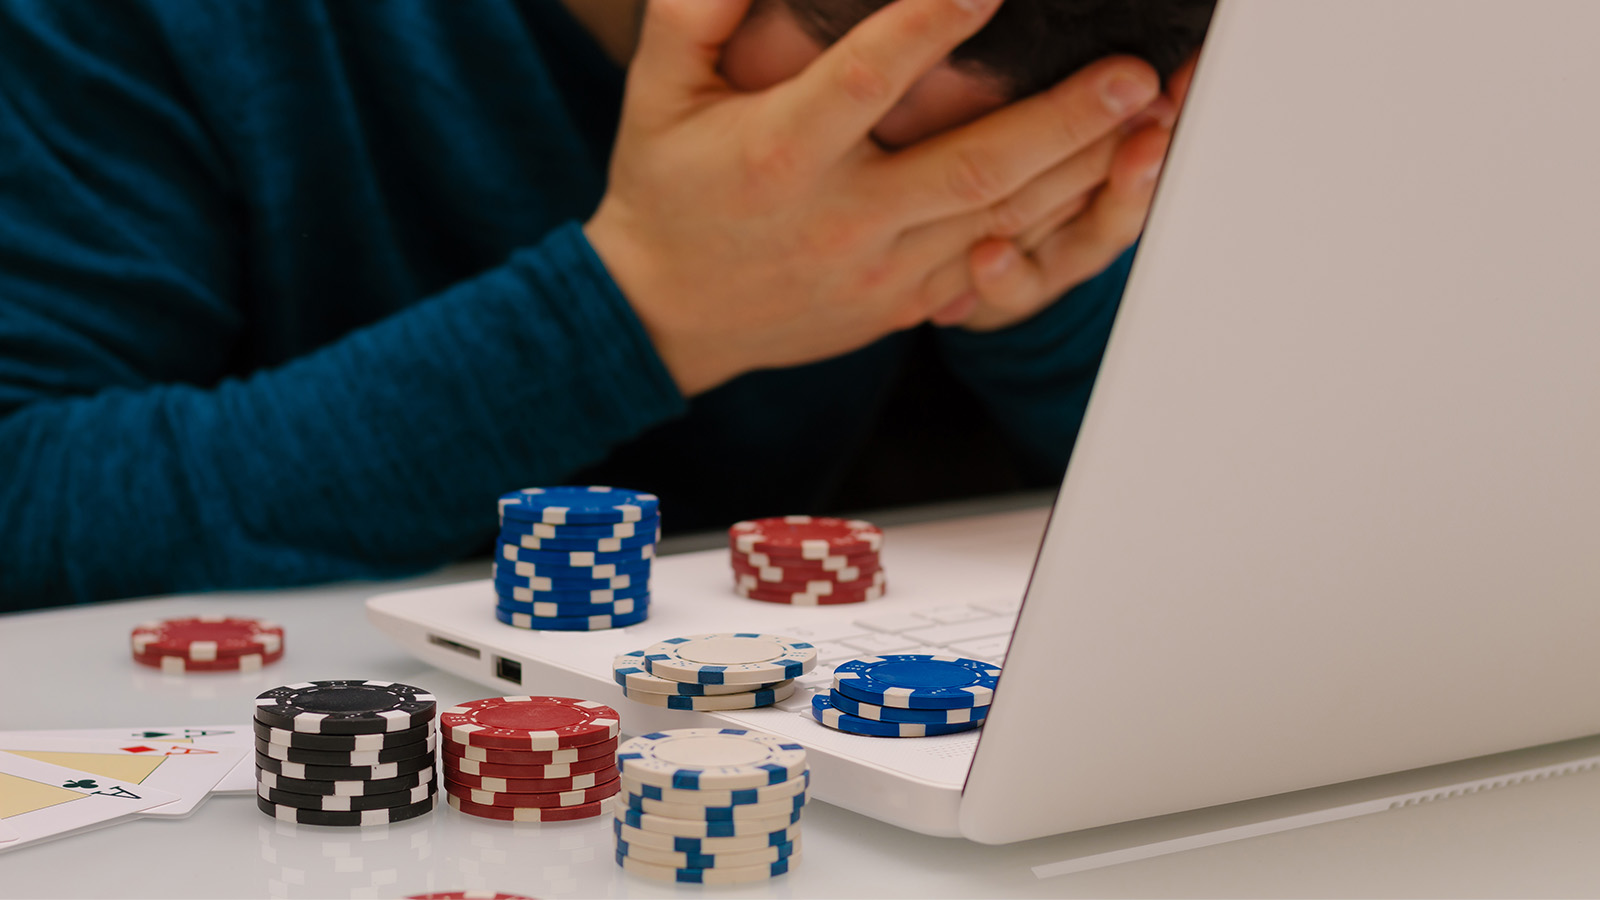 How to determine if you have a gambling problem